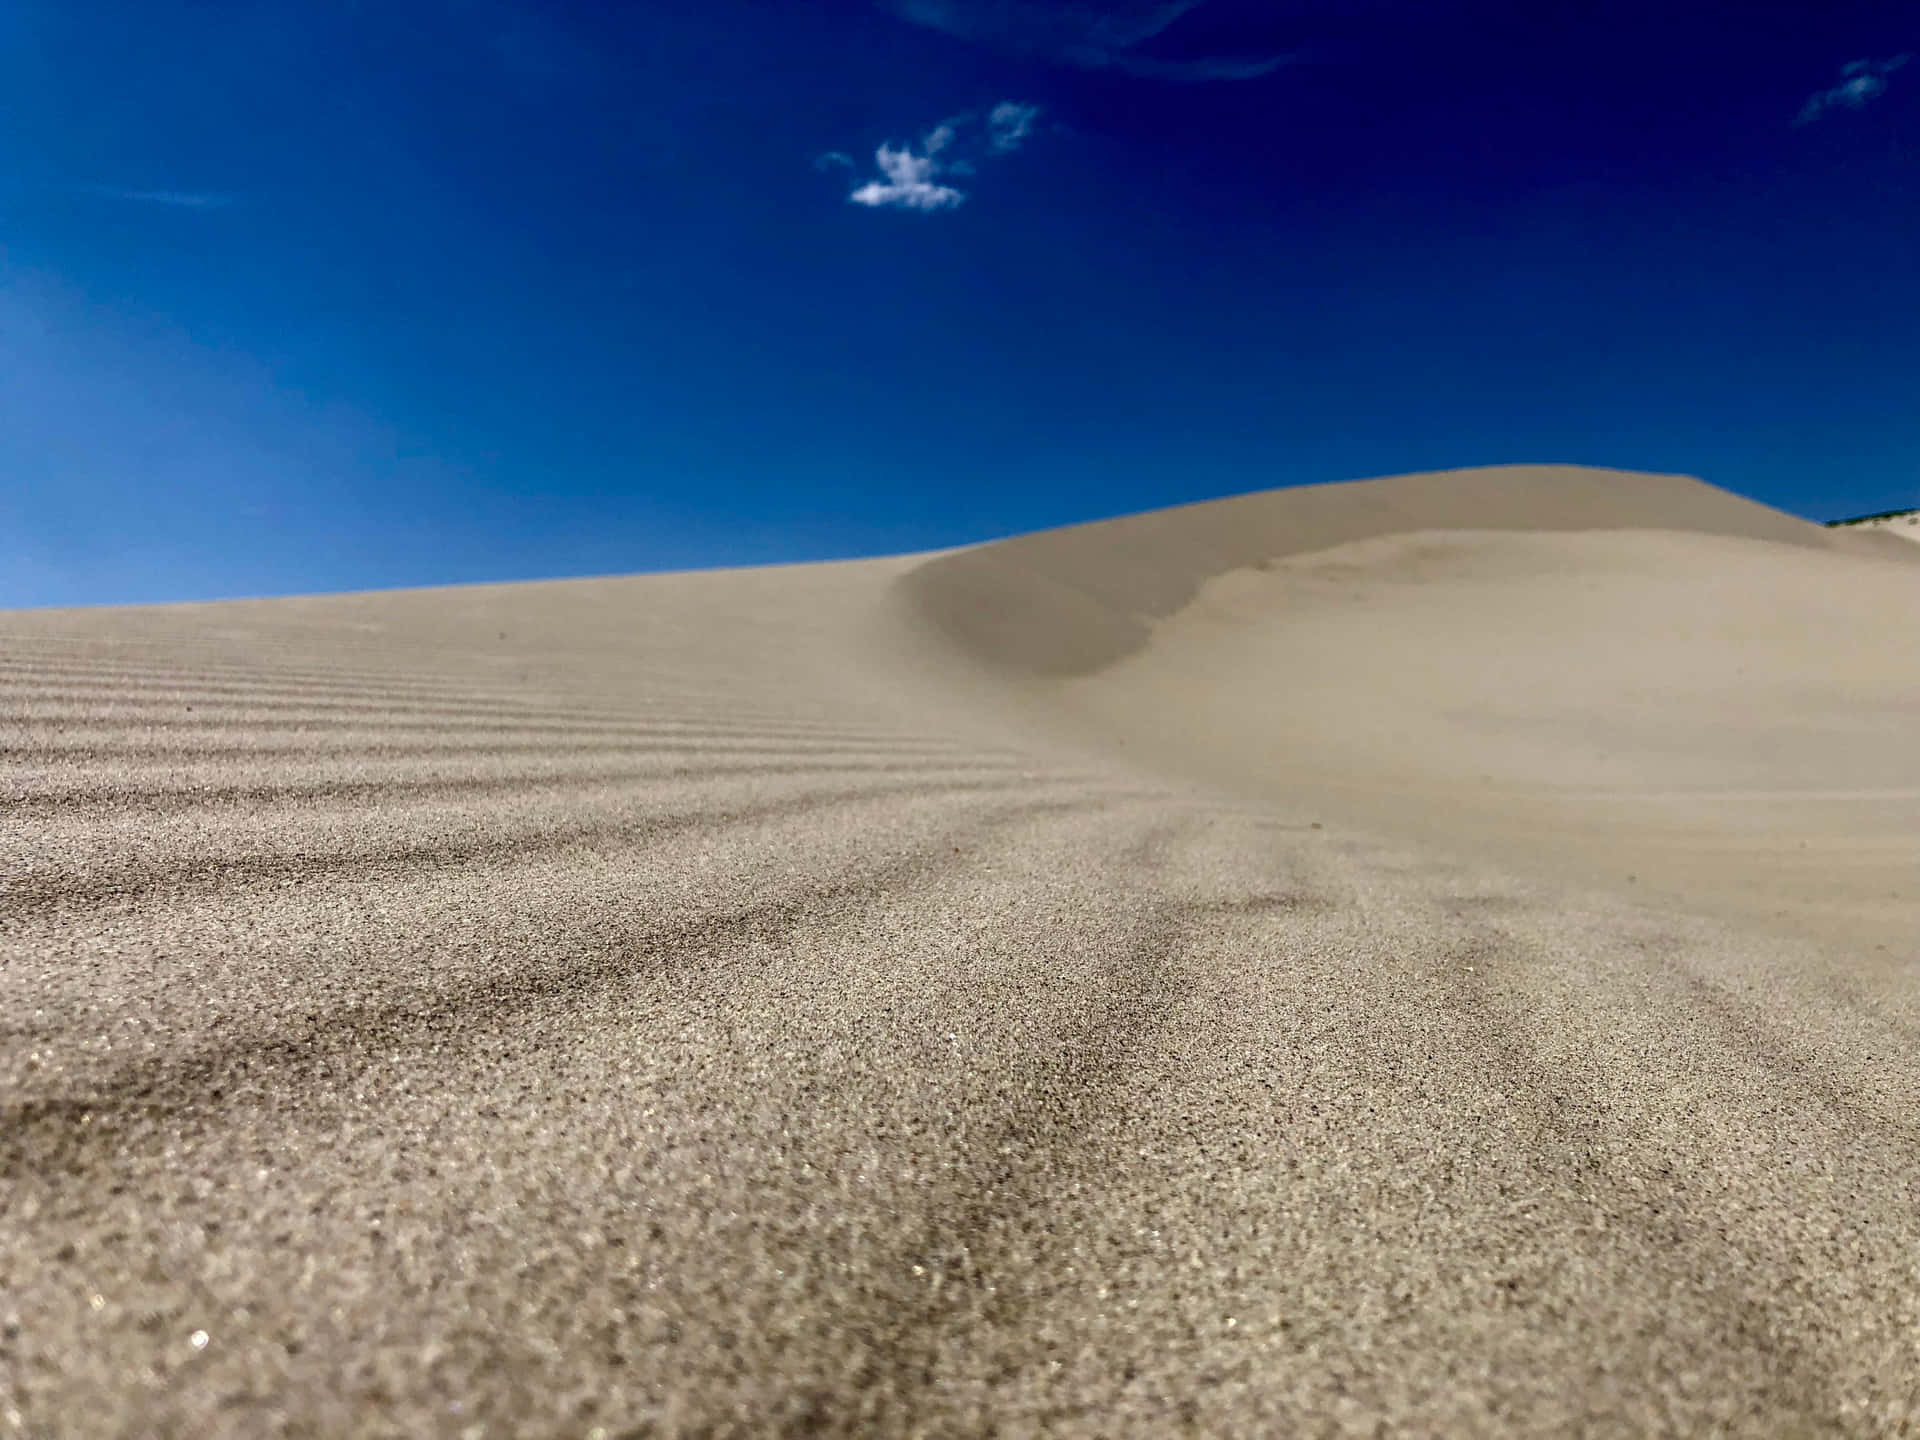 Download A Sand Dune With A Blue Sky And Clouds | Wallpapers.com